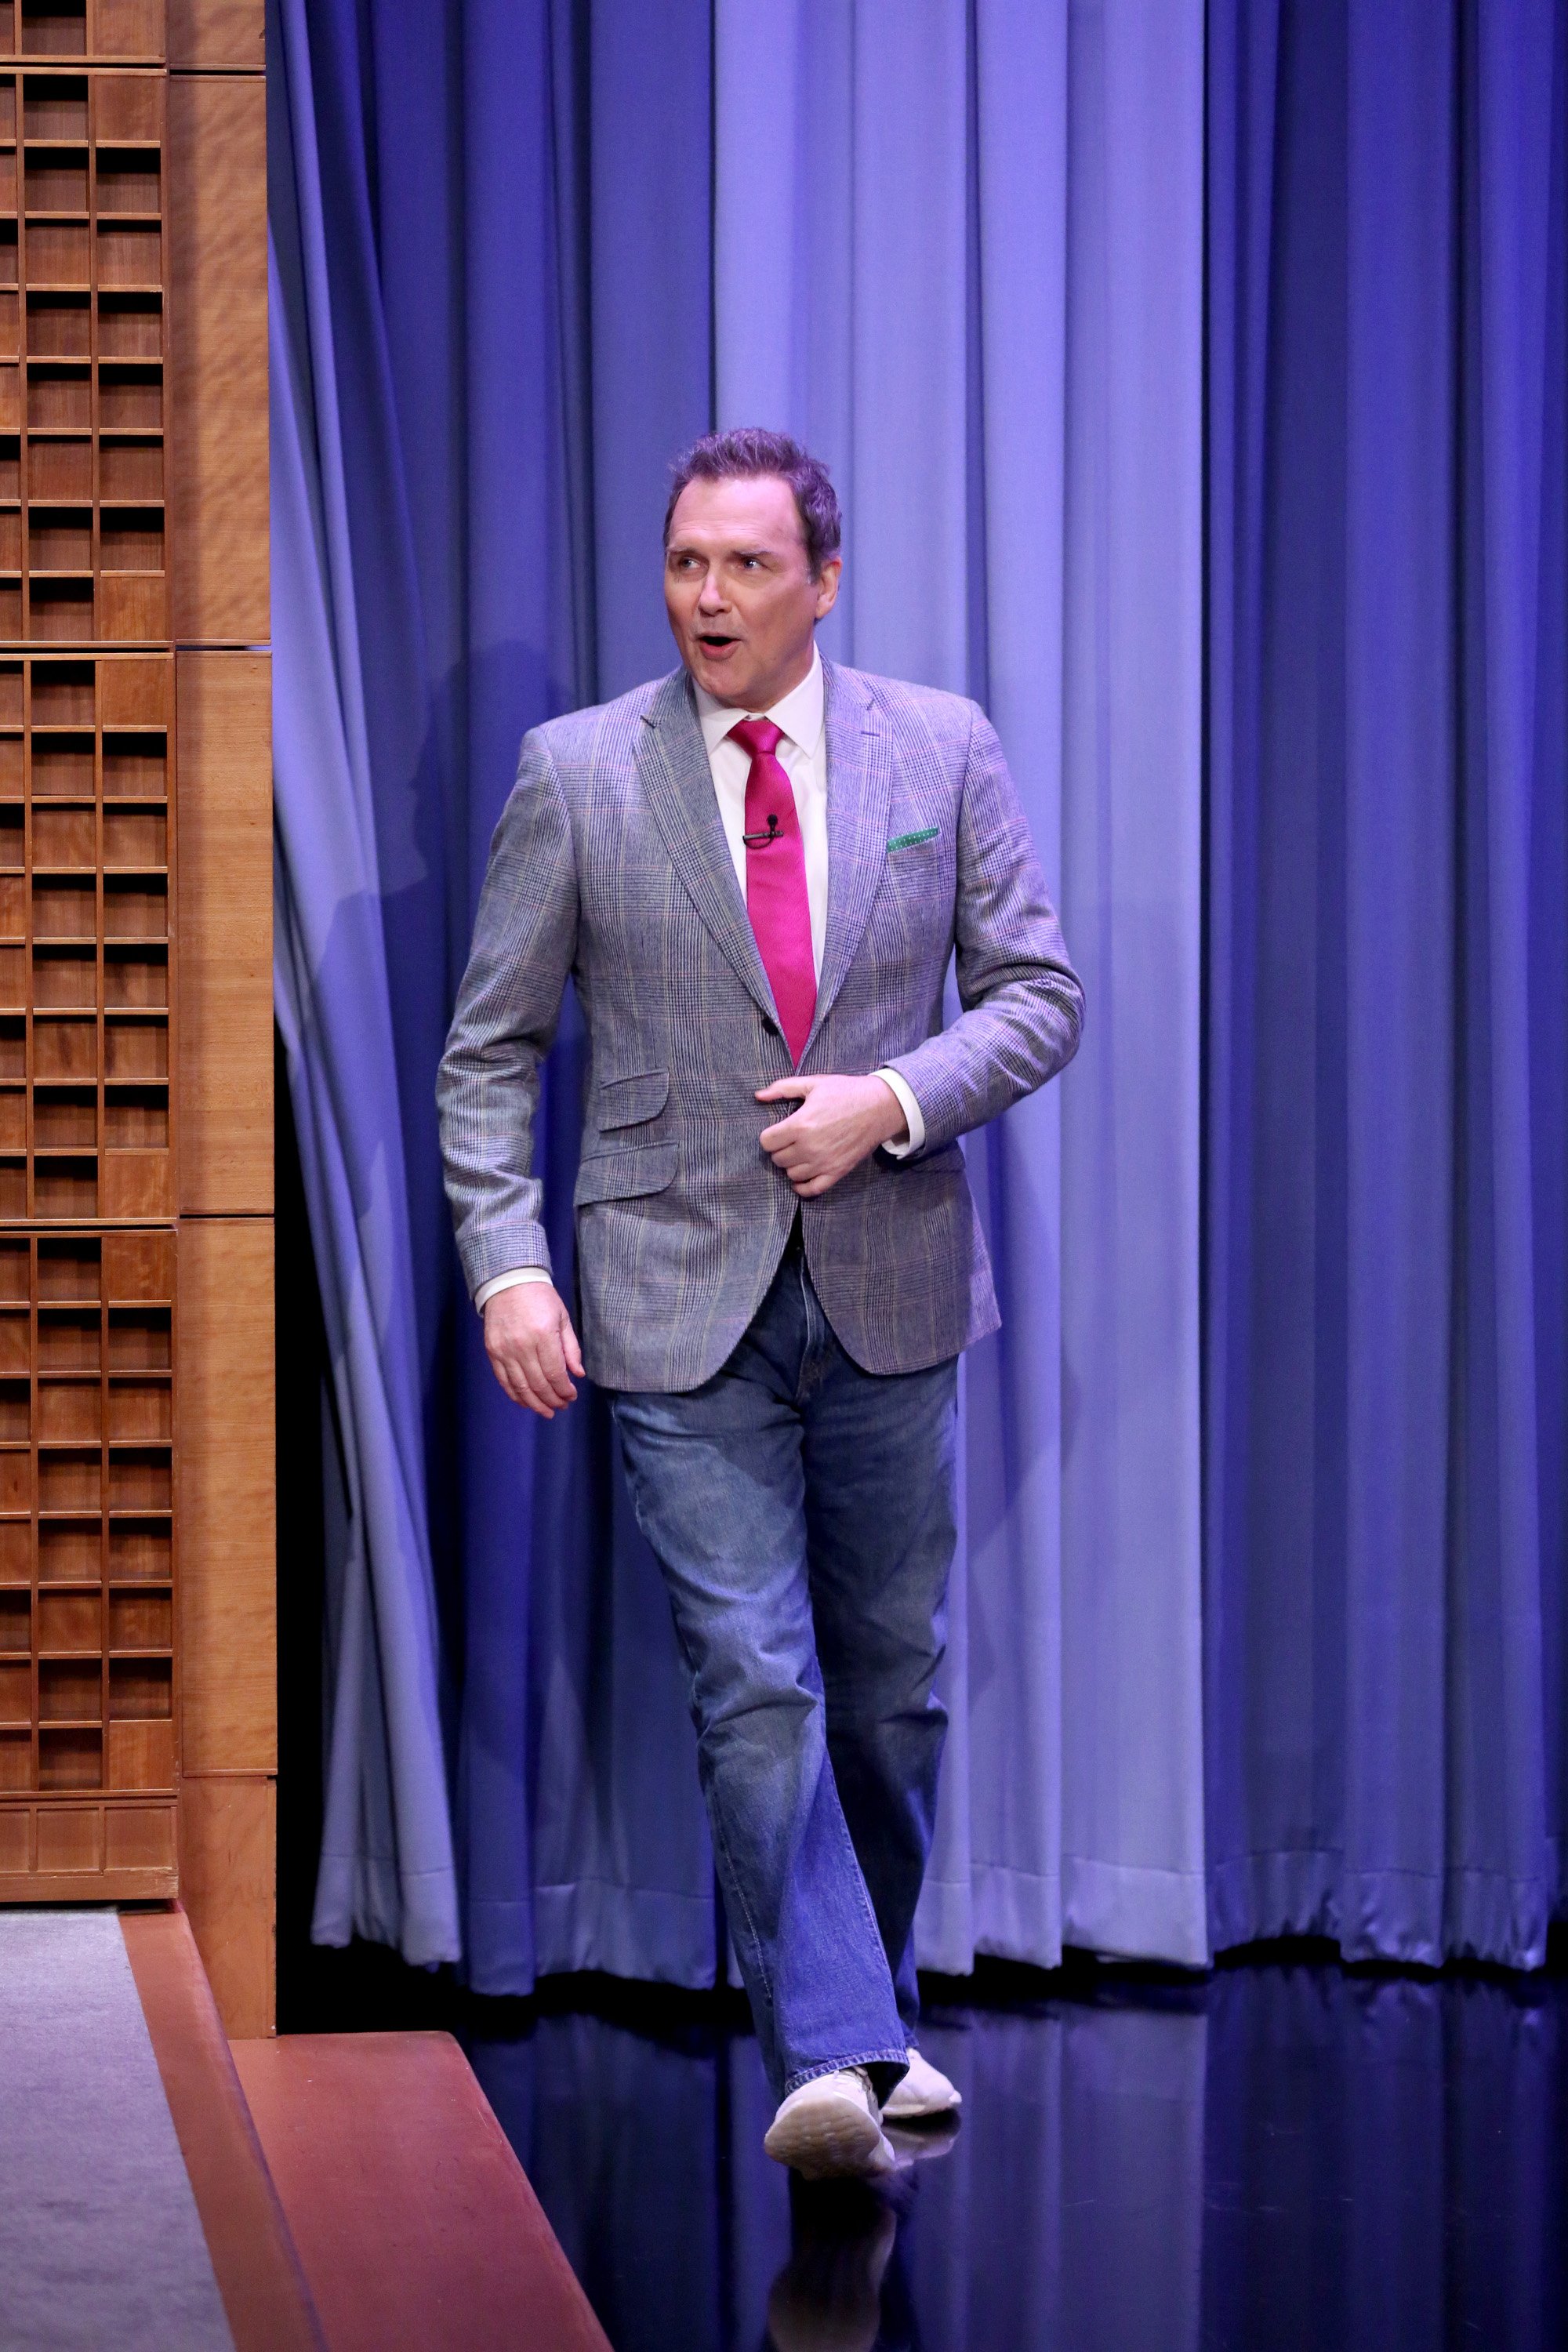 'SNL' alum and actor Norm Macdonald walking on stage in a blazer and jeans.